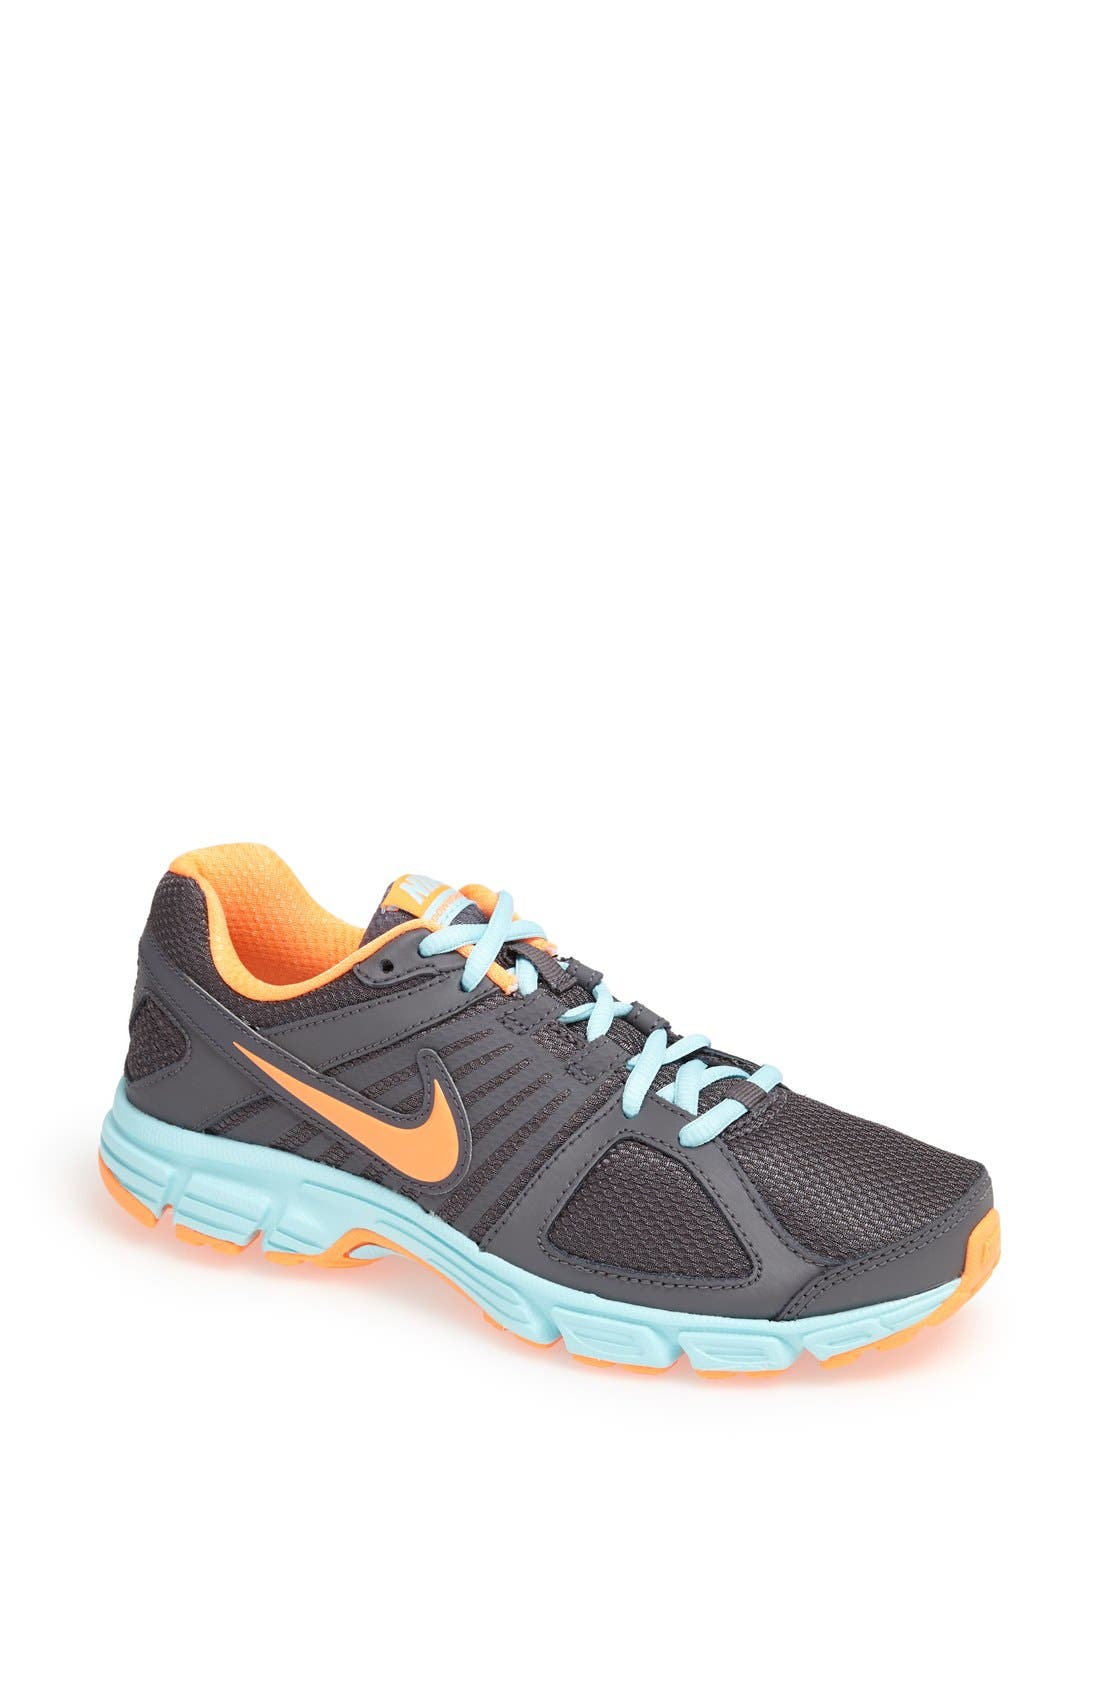 nike downshifter 5 price